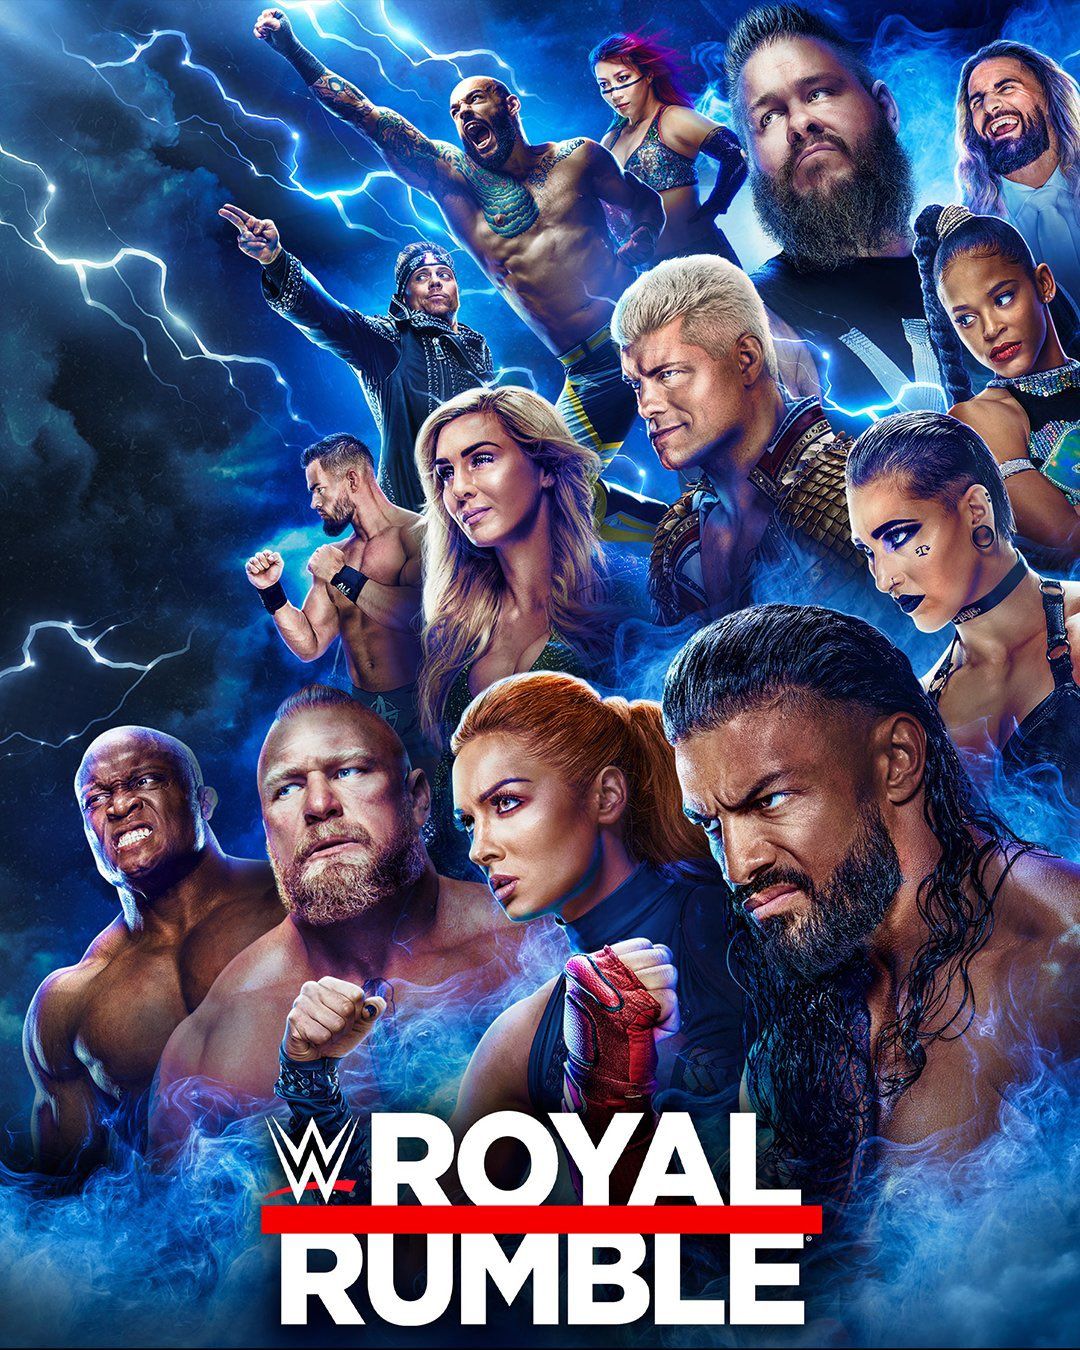 WWE Royal Rumble: Is The Rock returning? Fans certainly think so after seeing poster